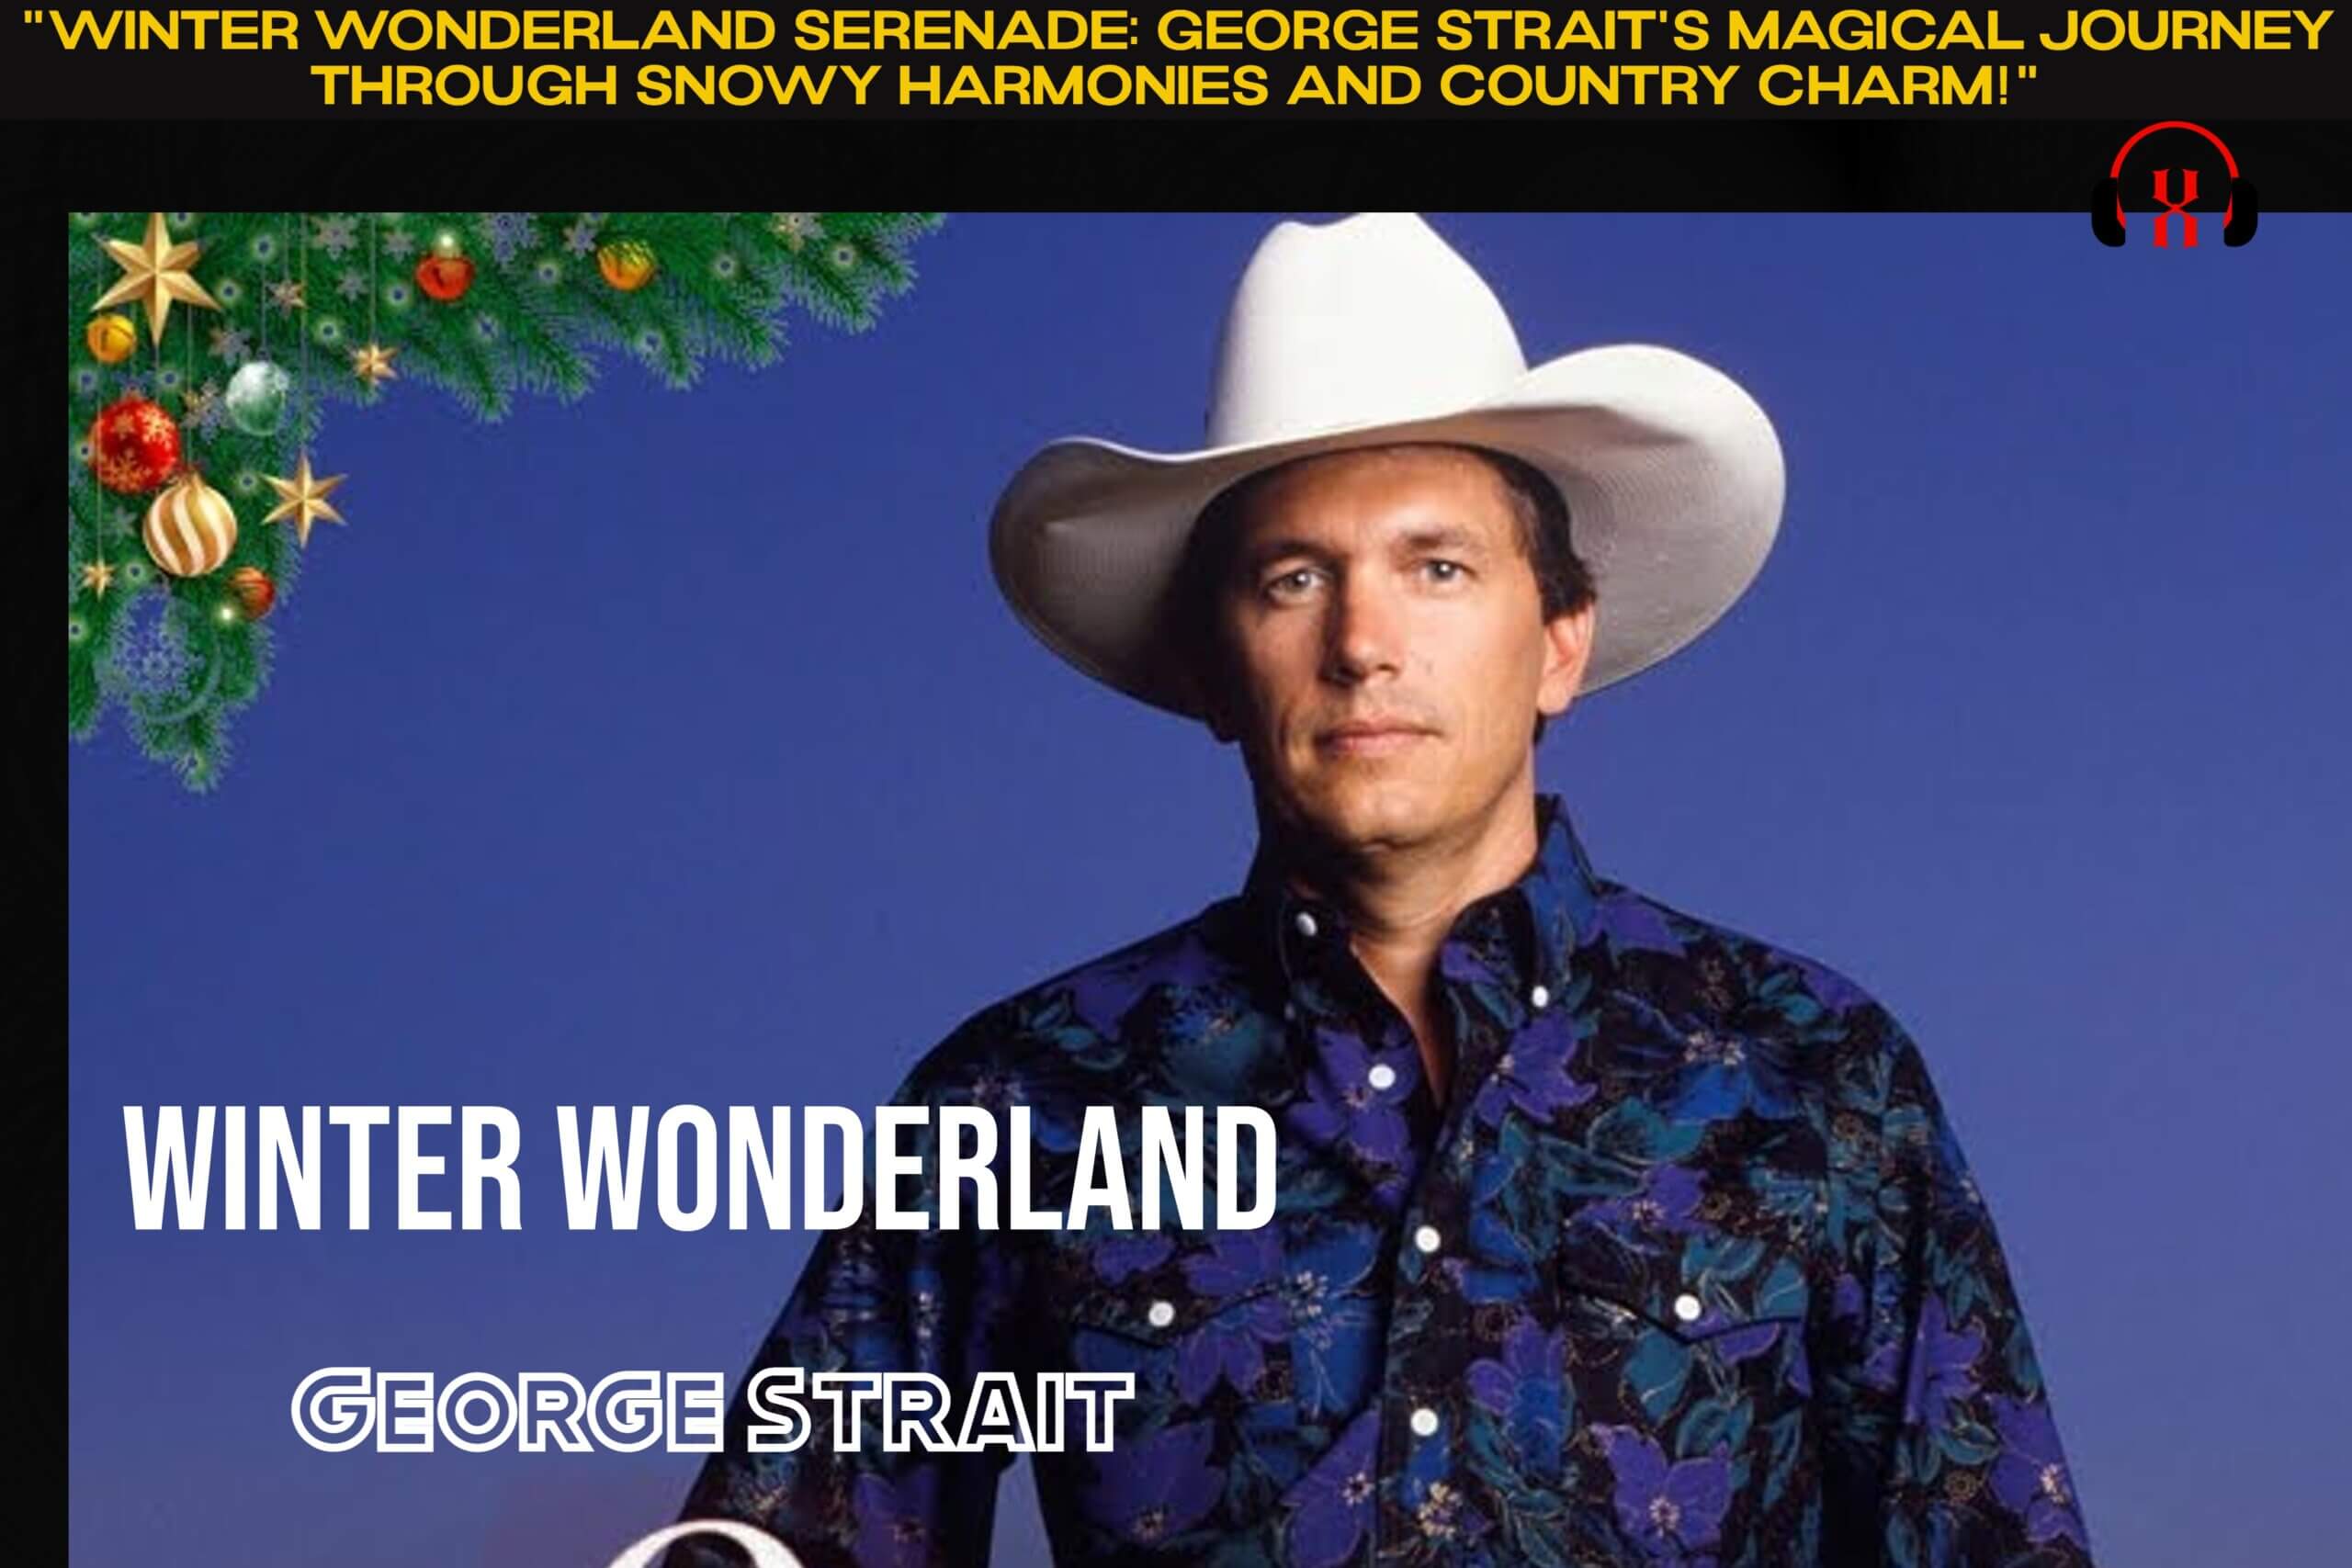 “Winter Wonderland Serenade: George Strait’s Magical Journey through Snowy Harmonies and Country Charm!”